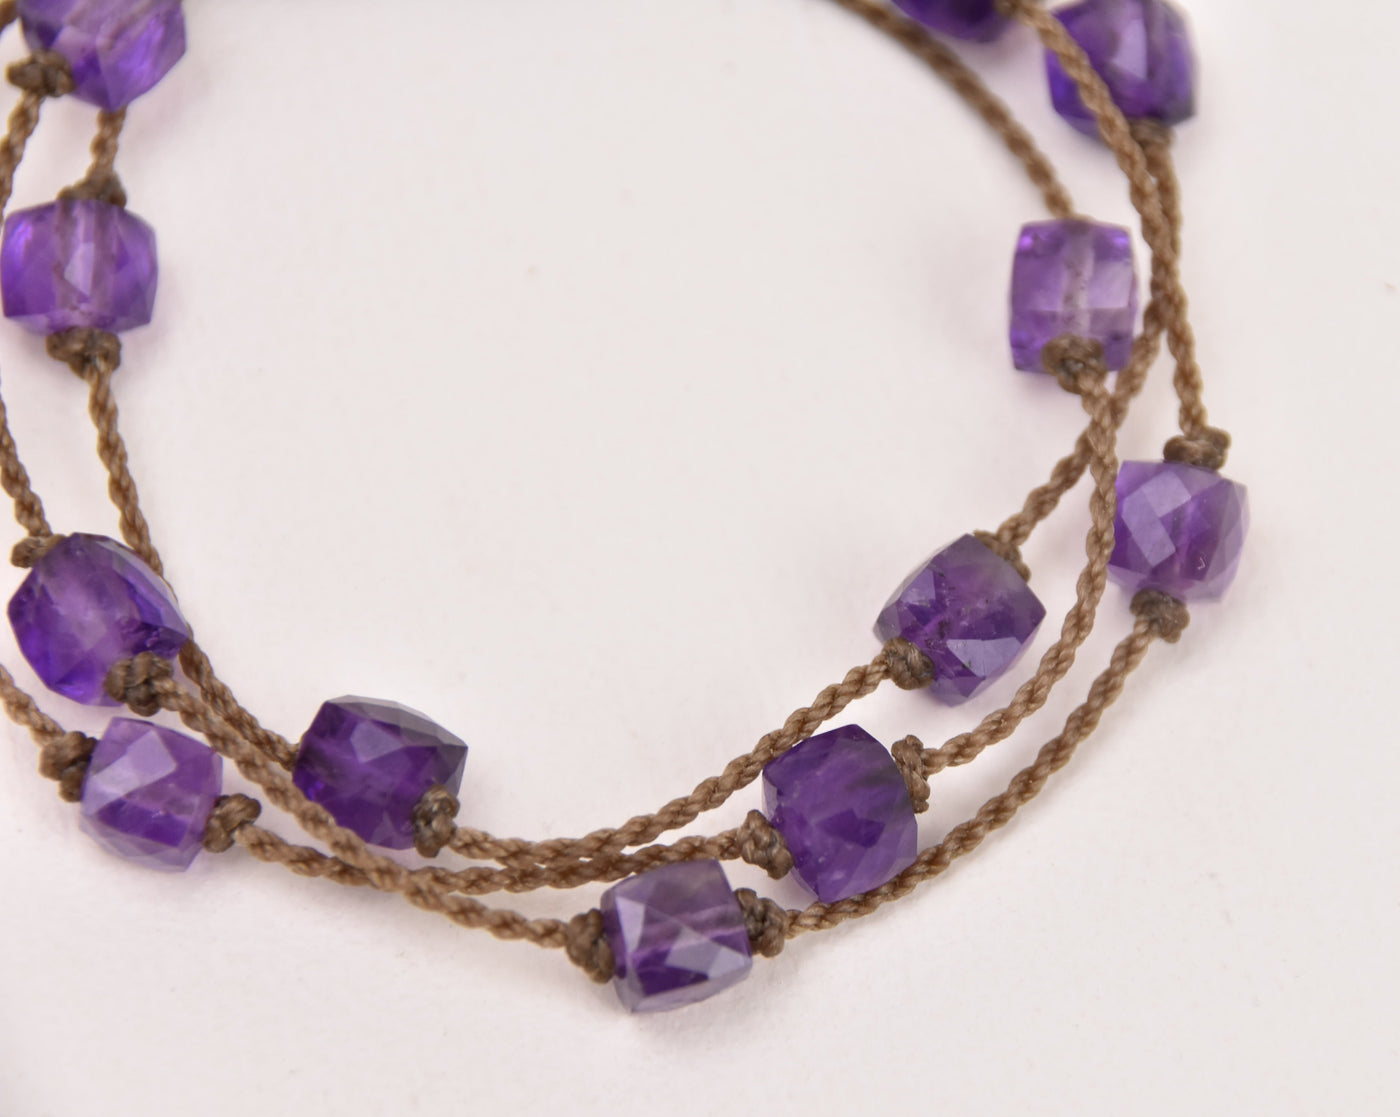 Amethyst Cube Petite Wrap - only 3 available!